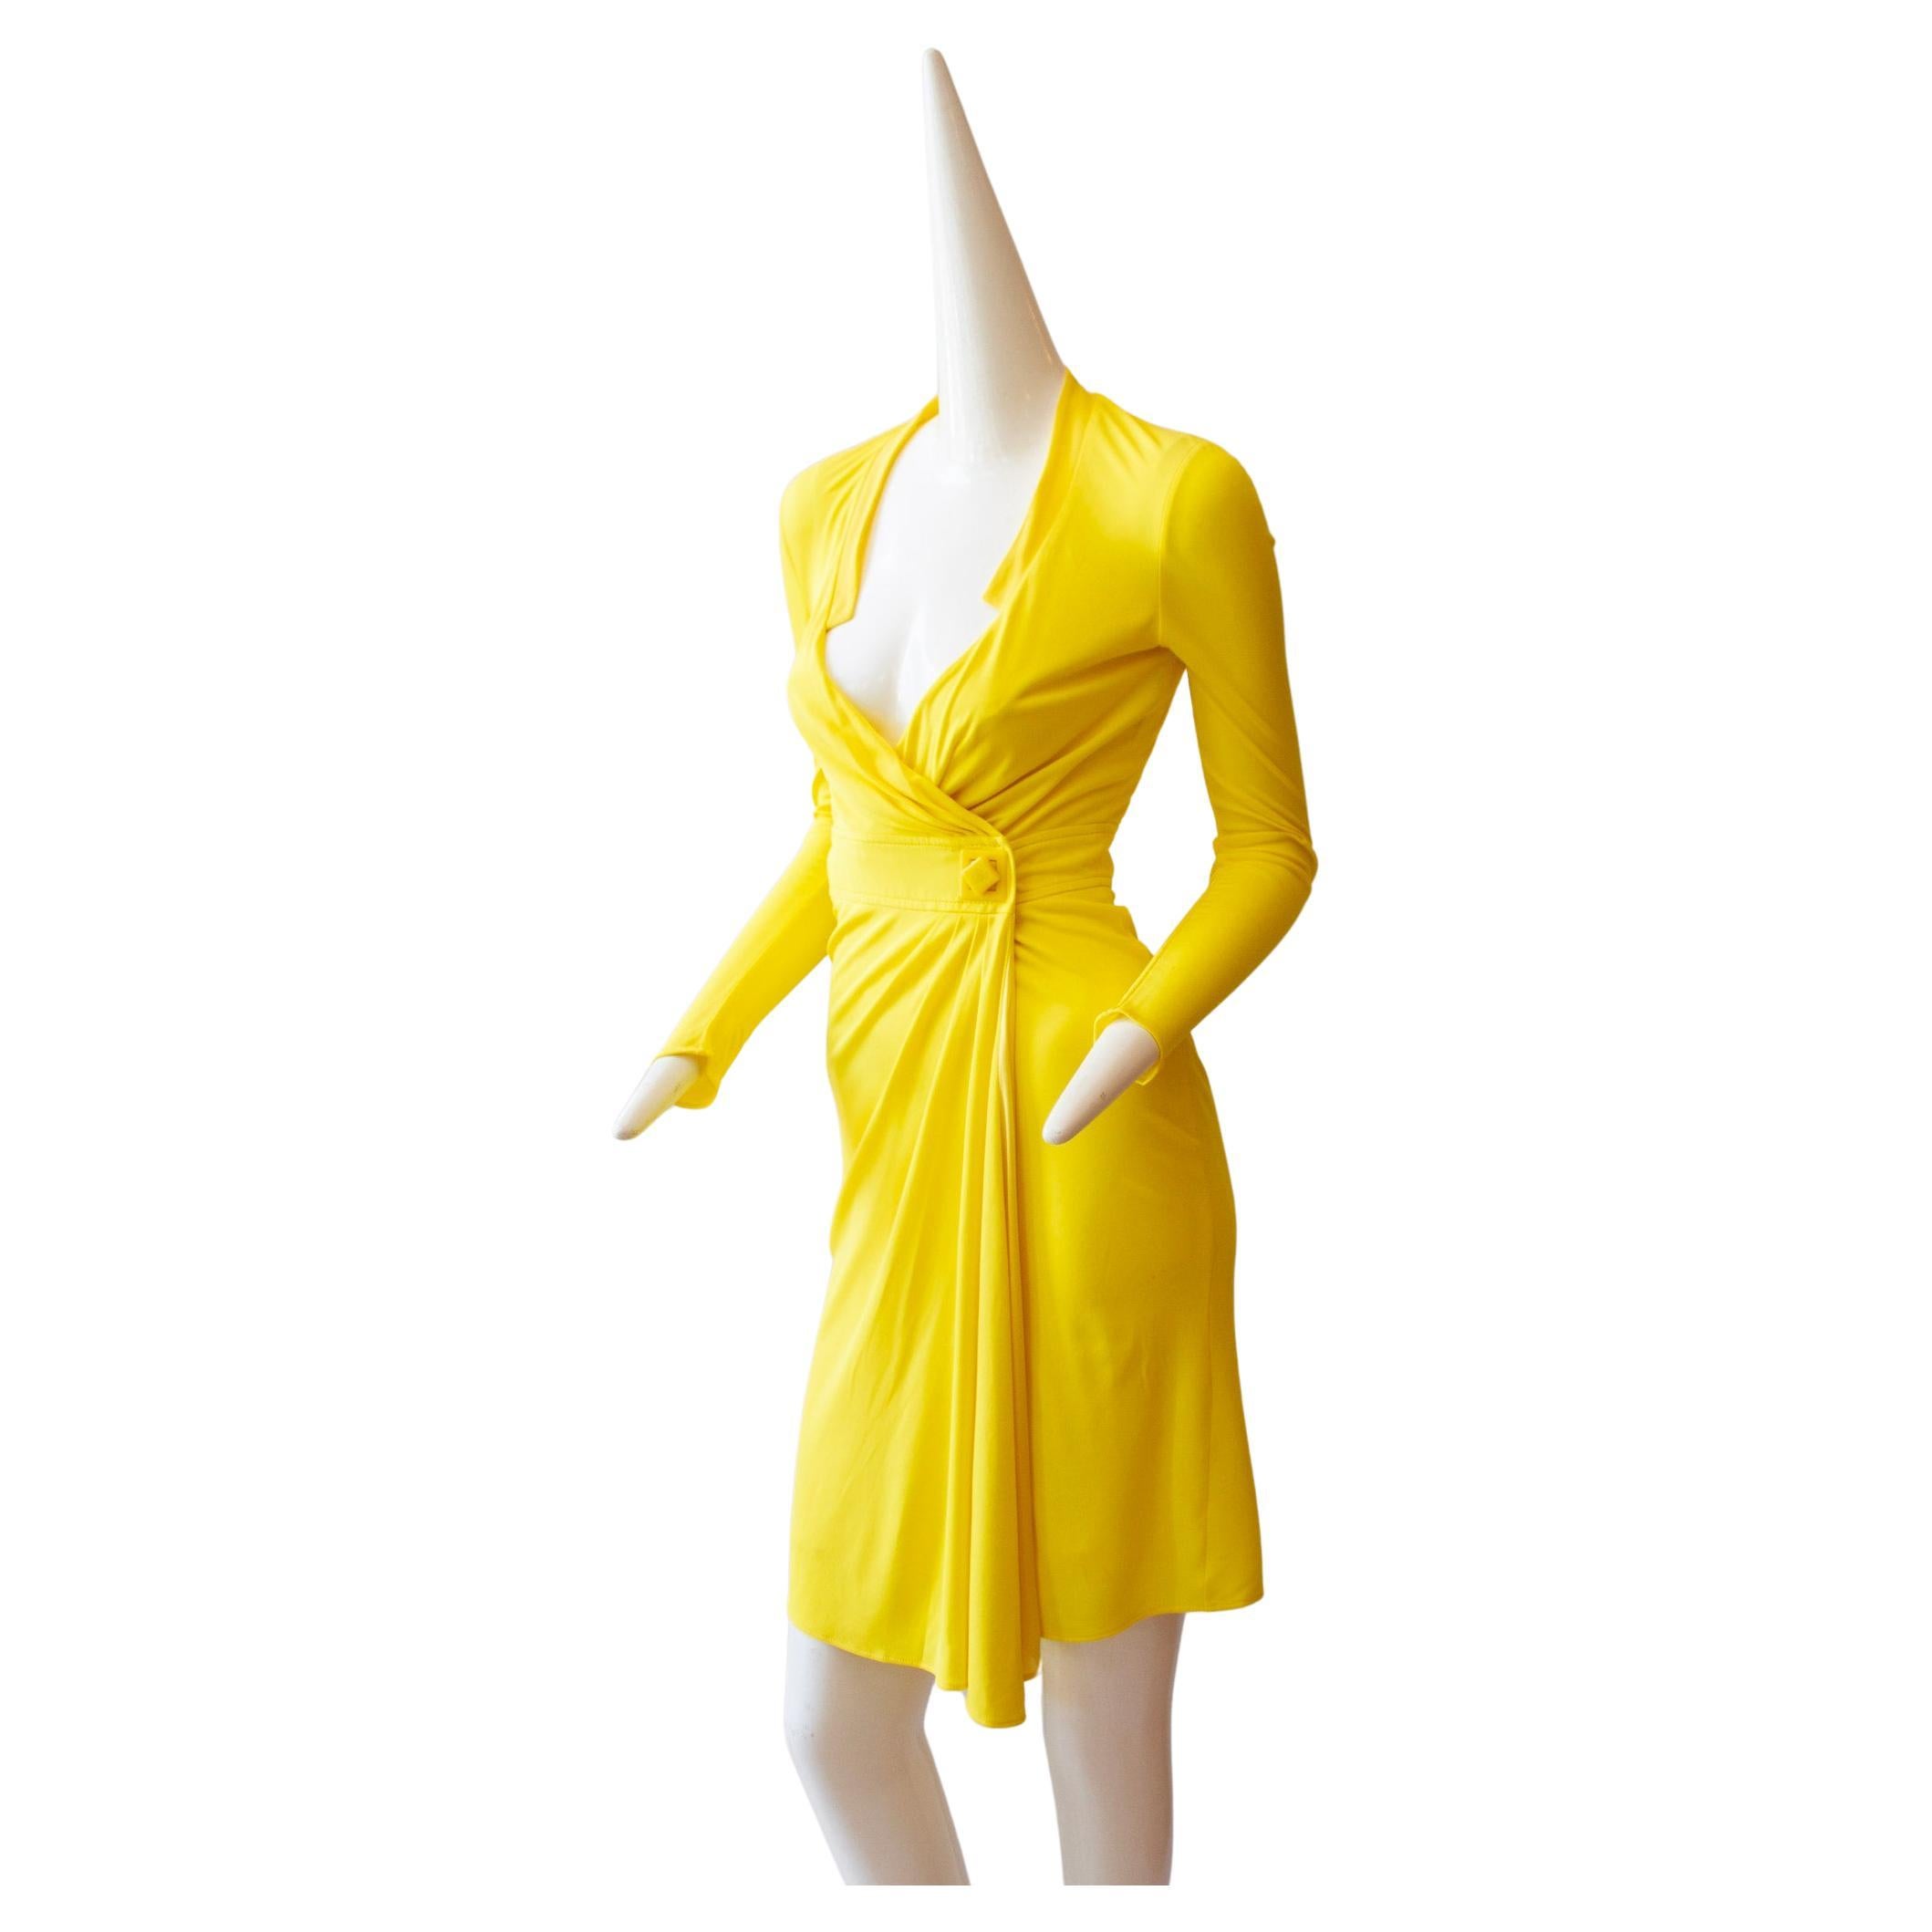 GIANNI VERSACE, Canary Yellow Mid-Length Wrap Dress with Iconic Medusa Fastener For Sale